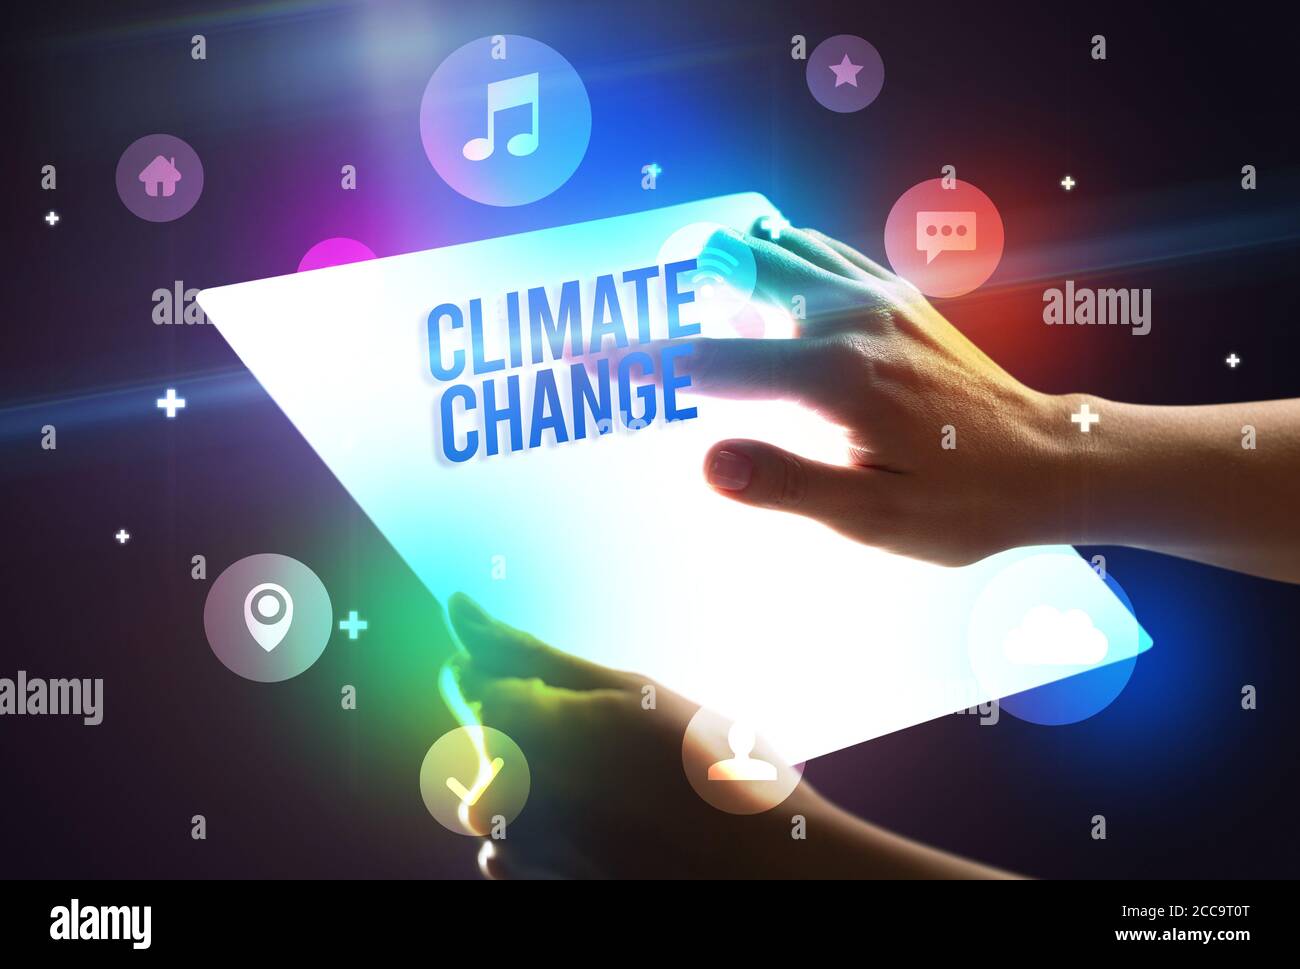 Holding futuristic tablet with CLIMATE CHANGE inscription, new technology concept Stock Photo